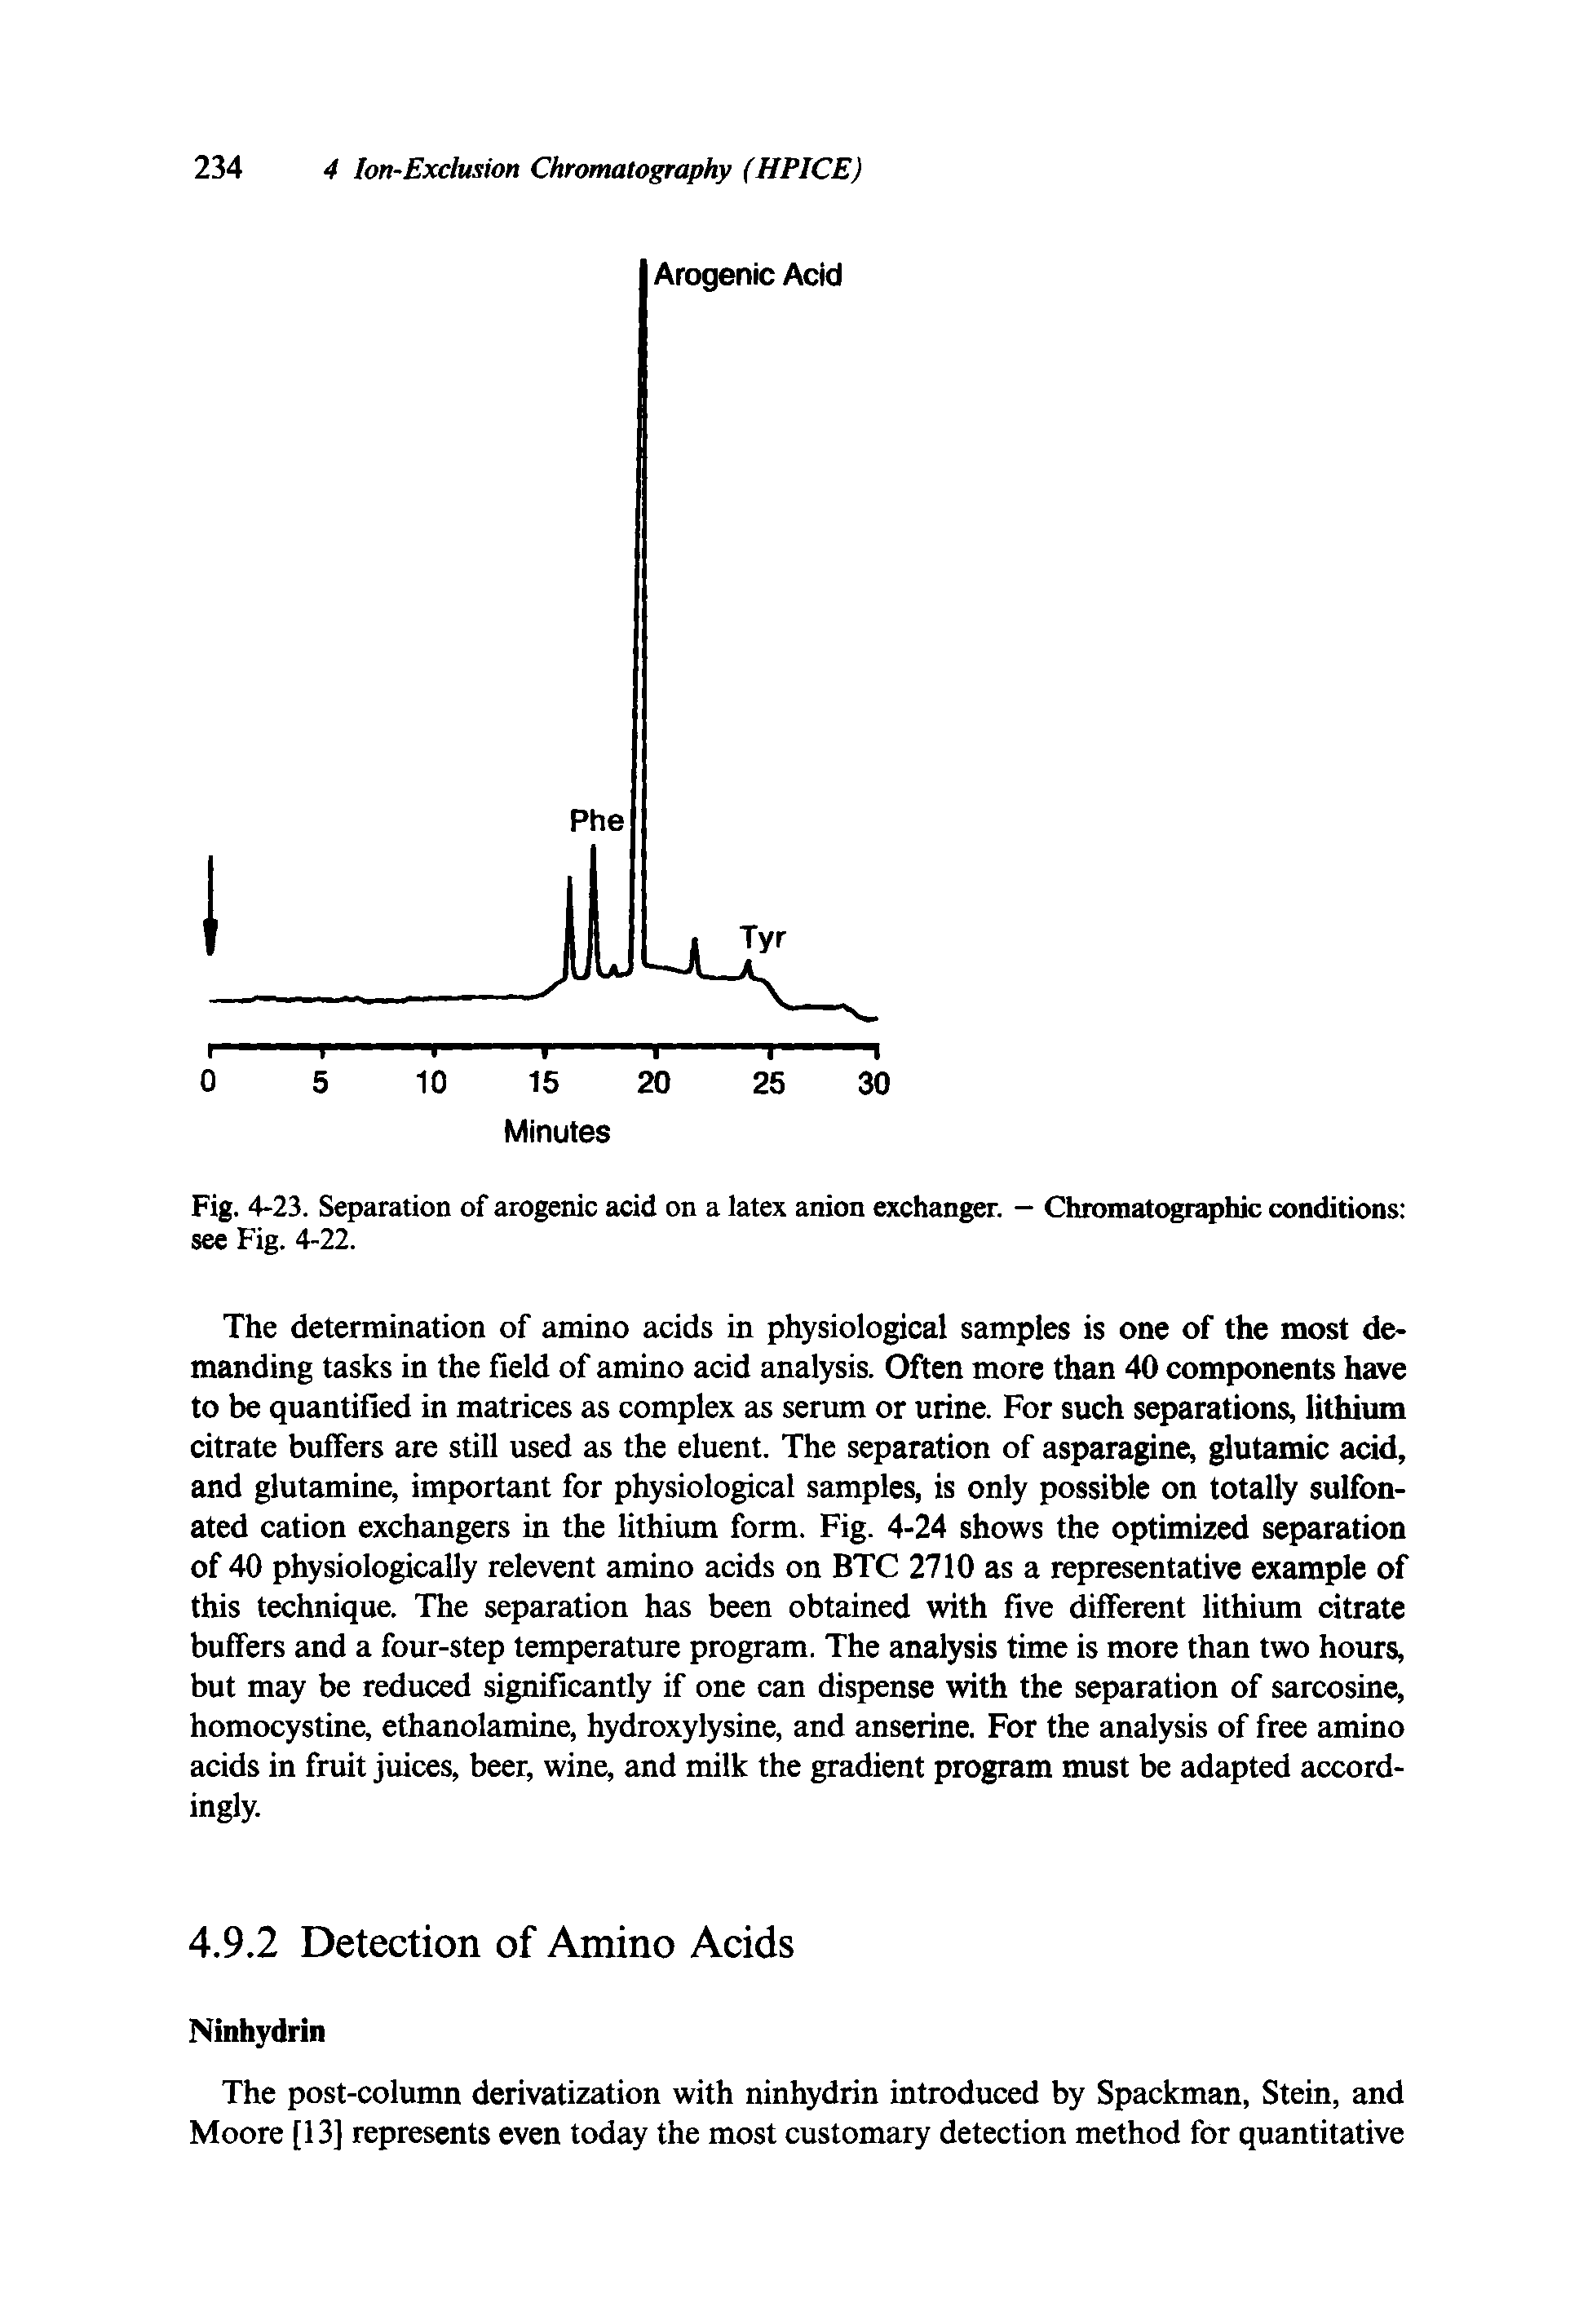 Fig. 4-23. Separation of arogenic acid on a latex anion exchanger. — Chromatographic conditions see Fig. 4-22.